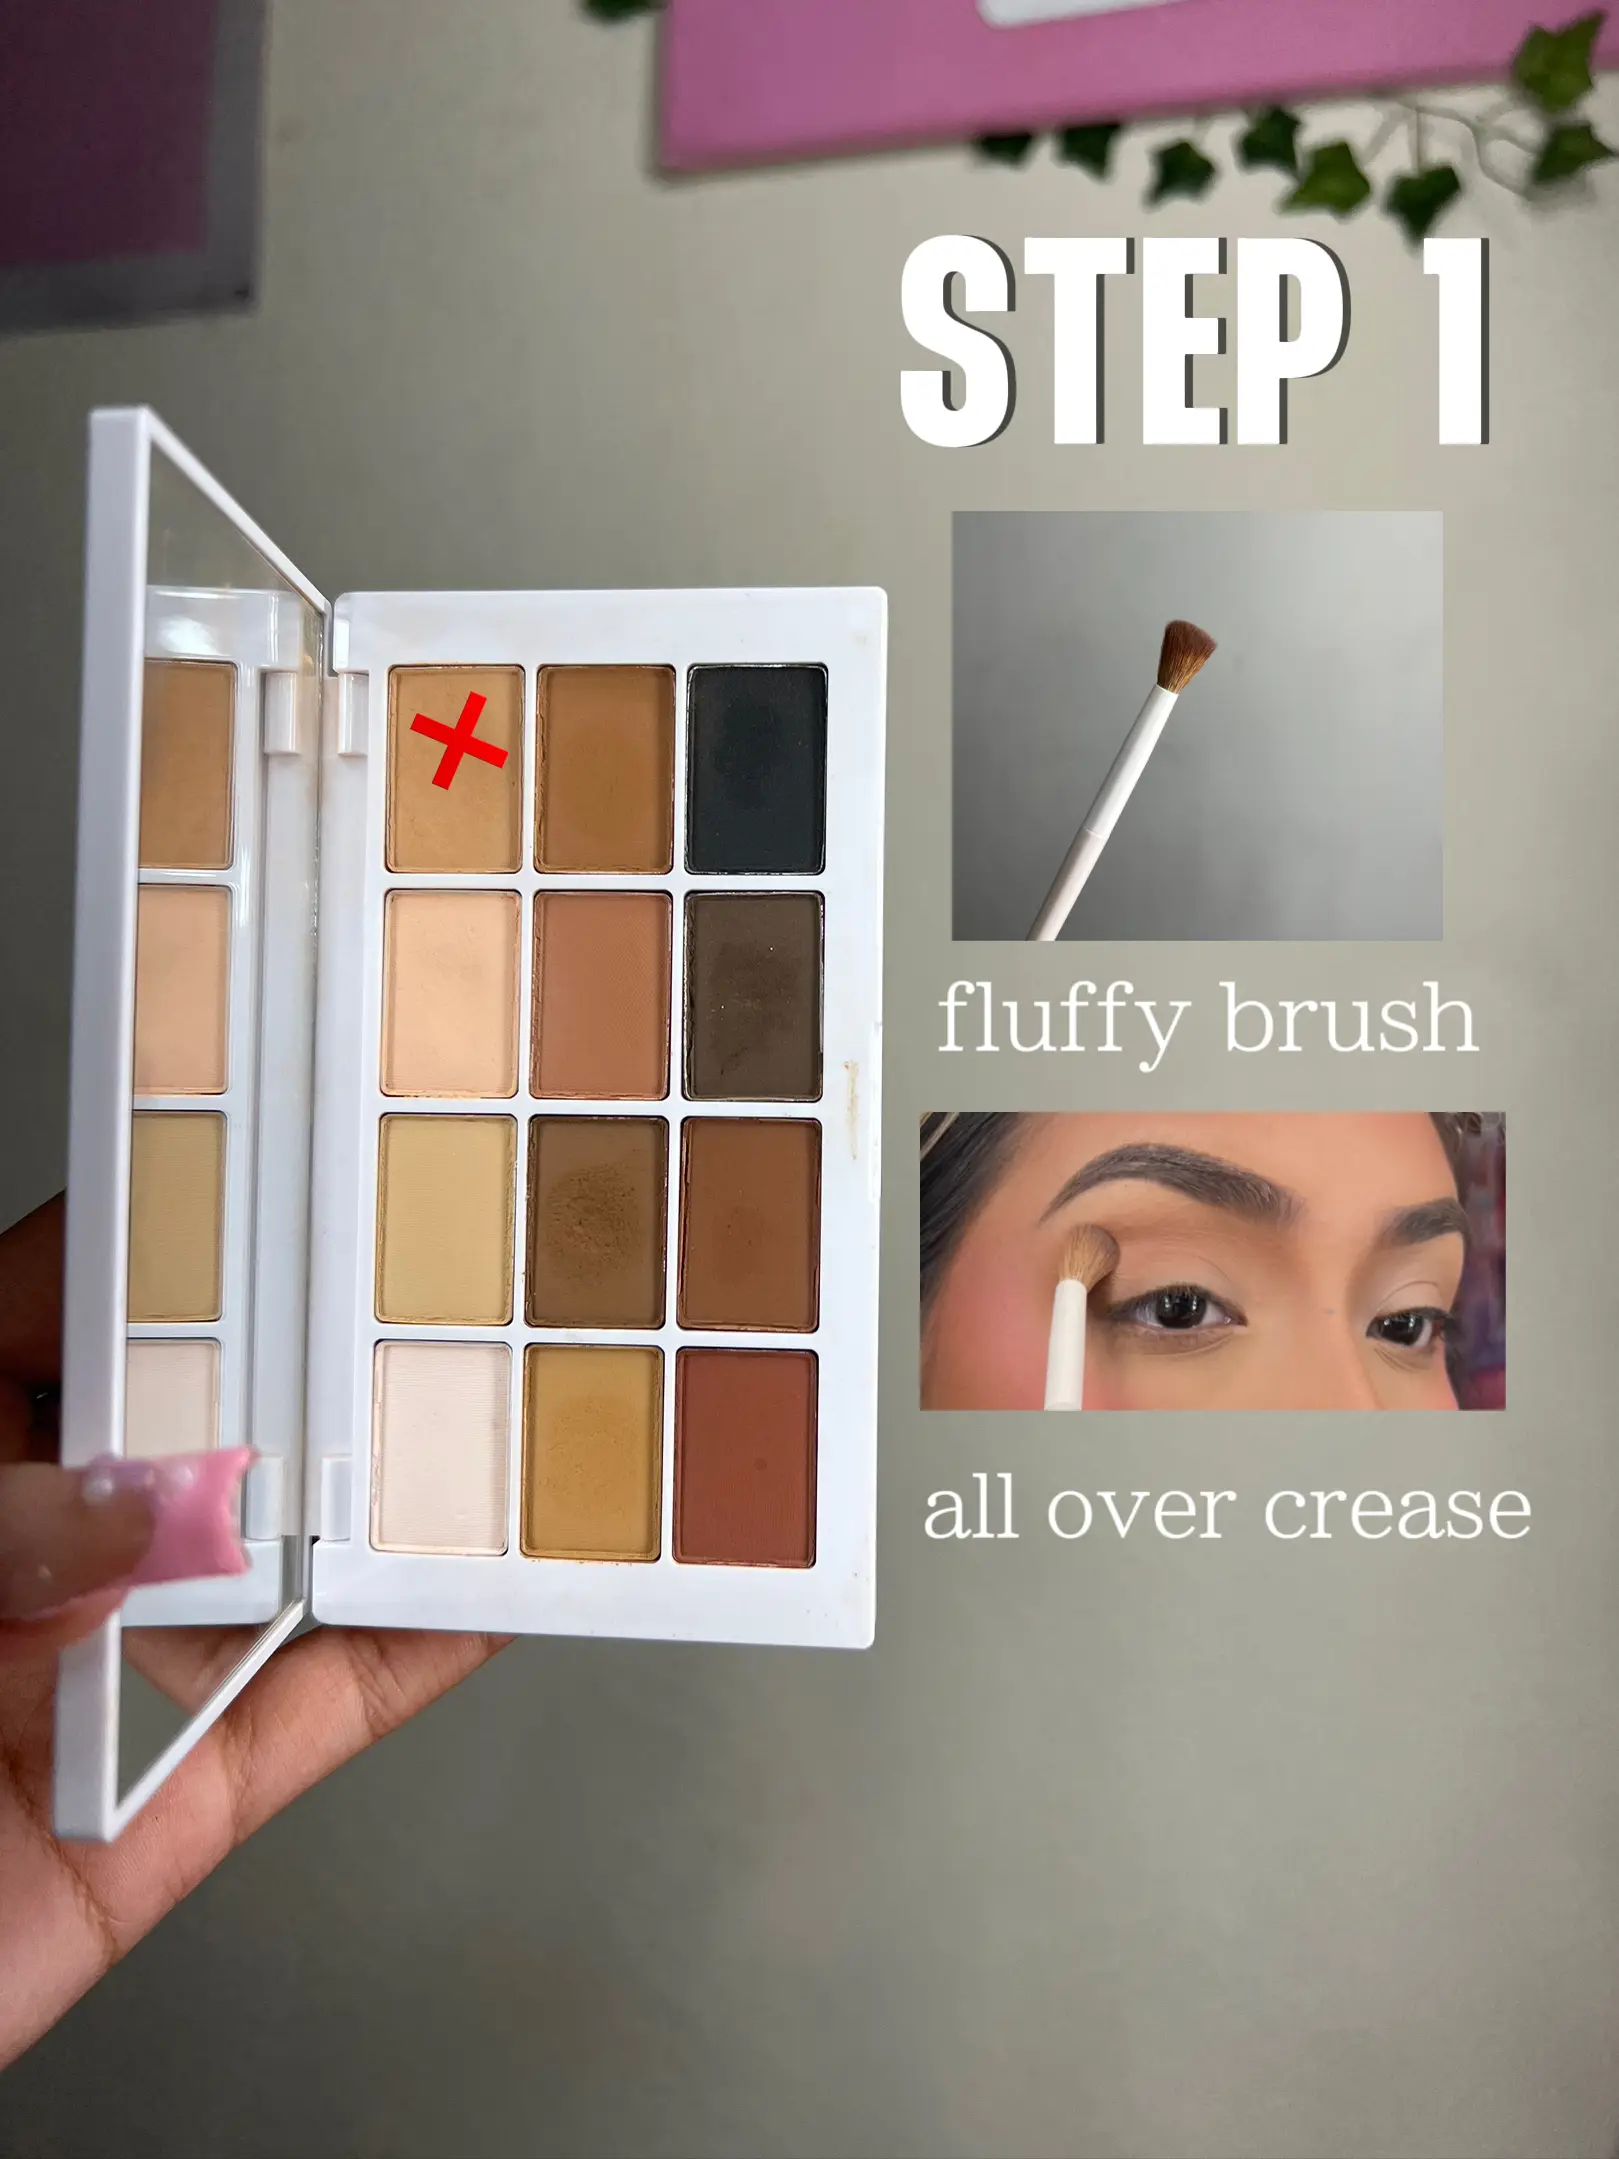 easy makeup routine from Eden._rose Lemon8 Search 